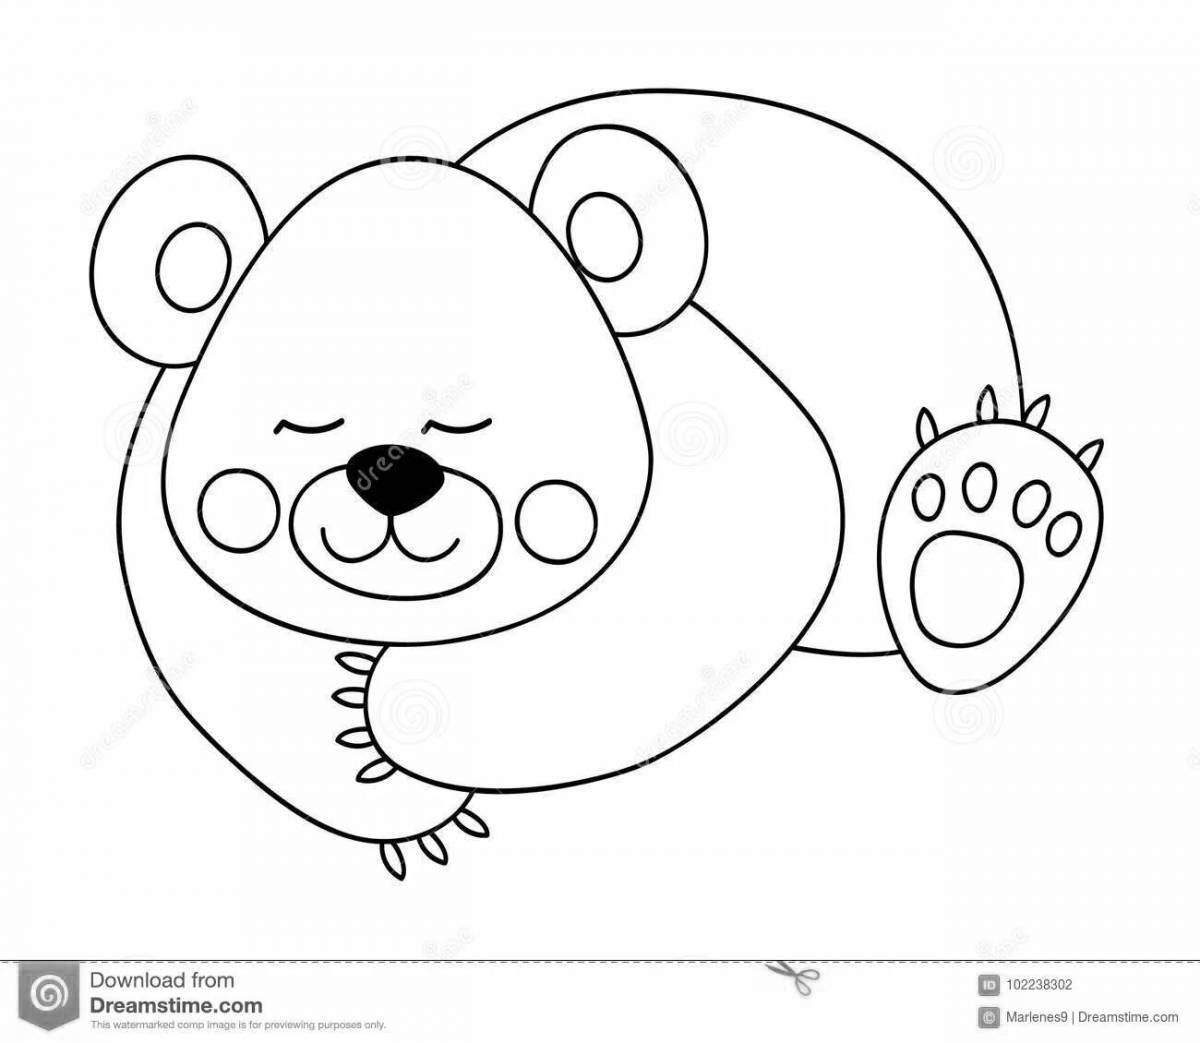 Colorful bear in a den coloring book